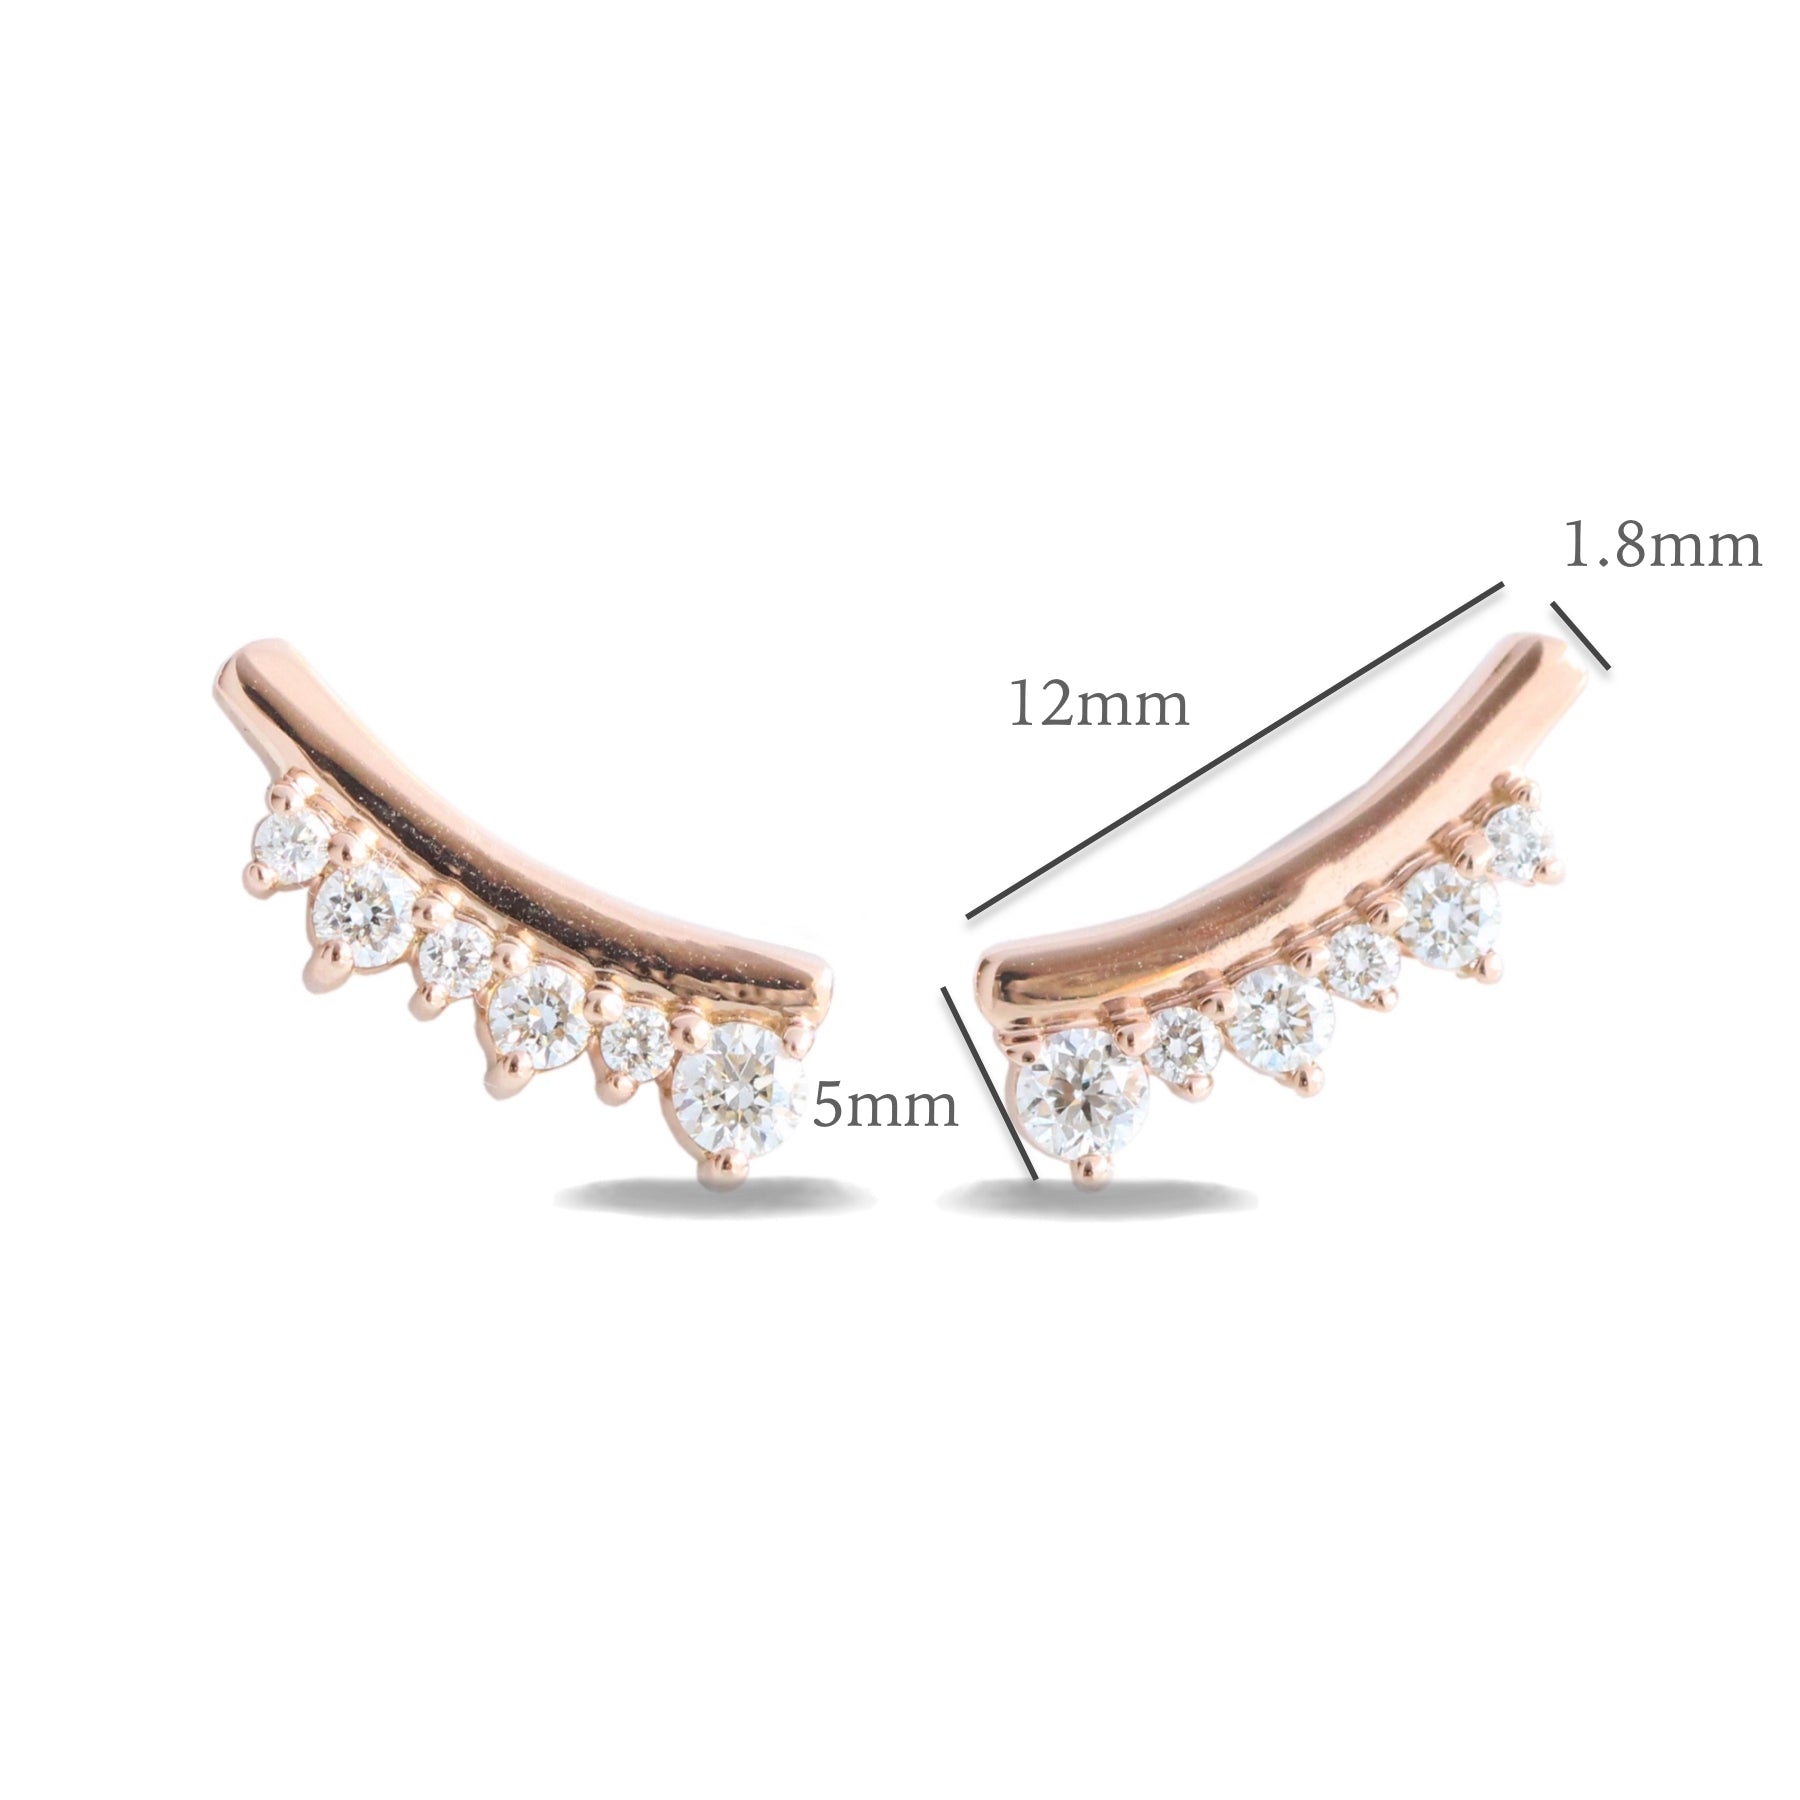 Curved crown diamond earrings in rose gold studs la more design jewelry